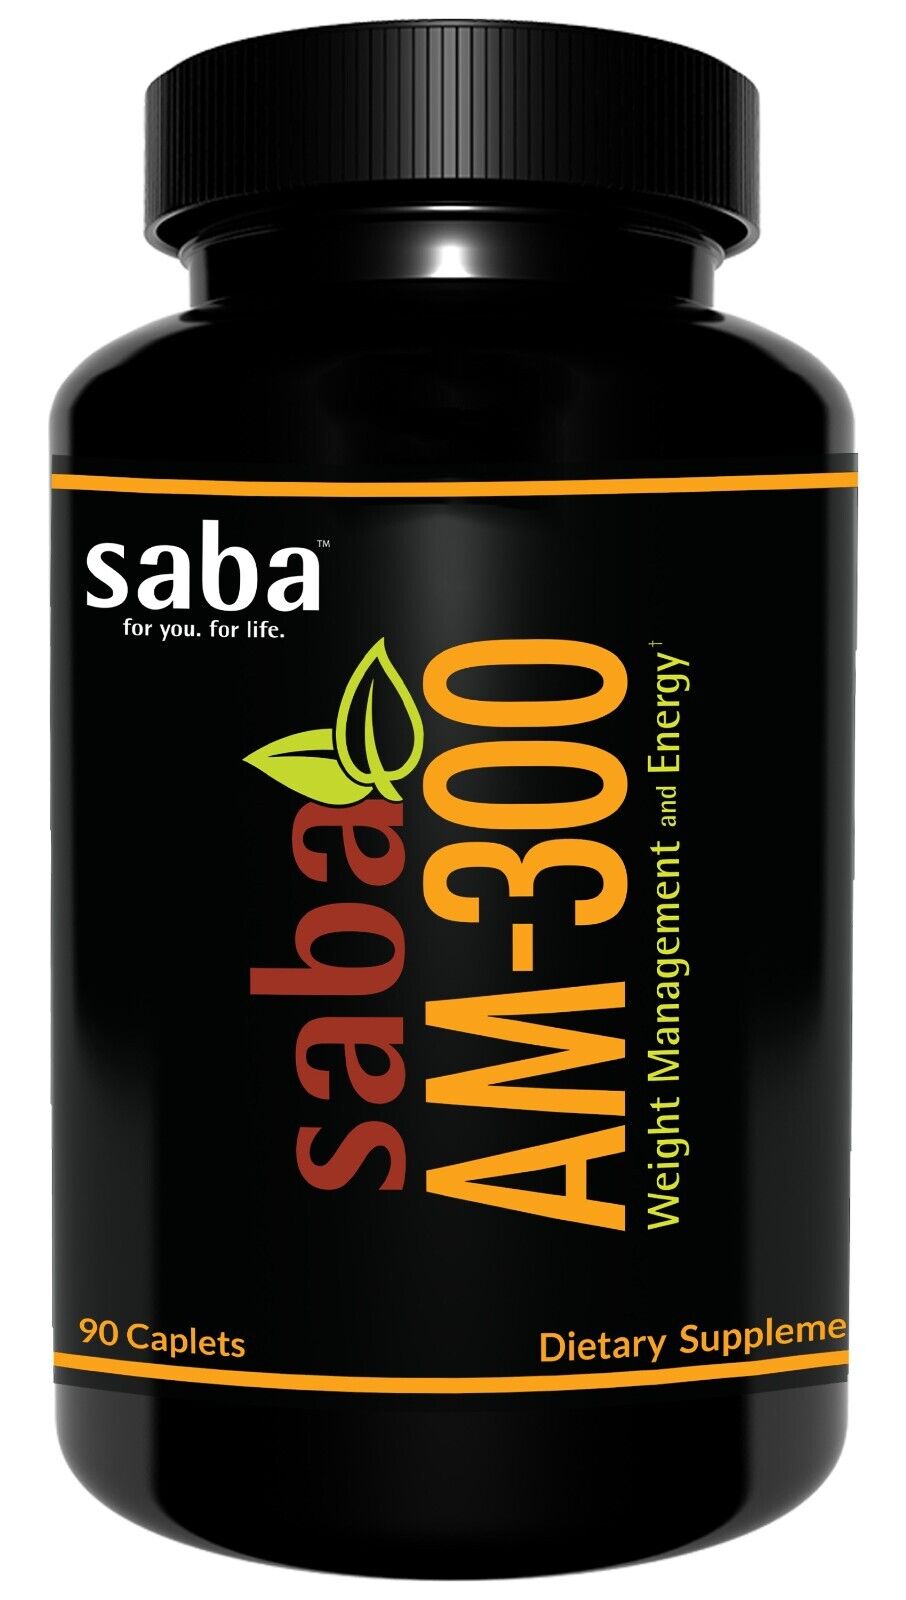 Saba AM - 300 Thermogenic Fat Burner - Weight Loss - Energy Booster - Pills